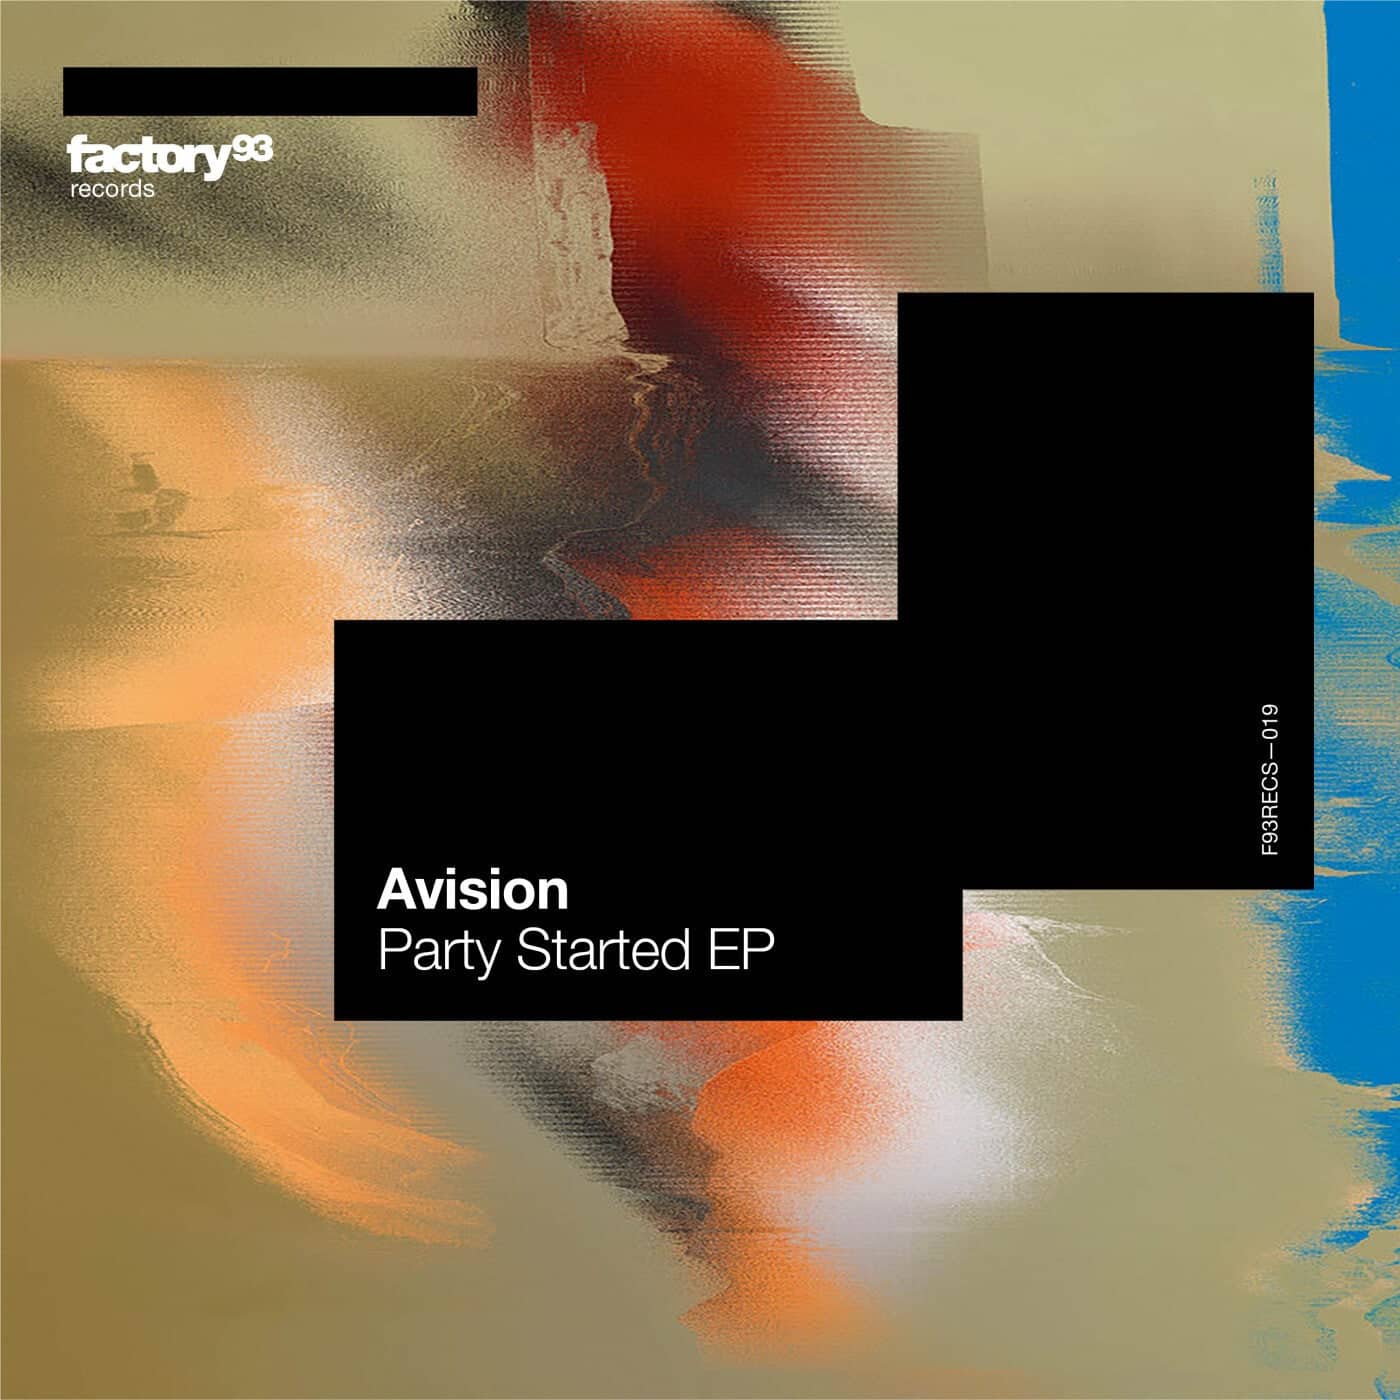 image cover: Strafe, Avision - Party Started EP / F93RECS019B